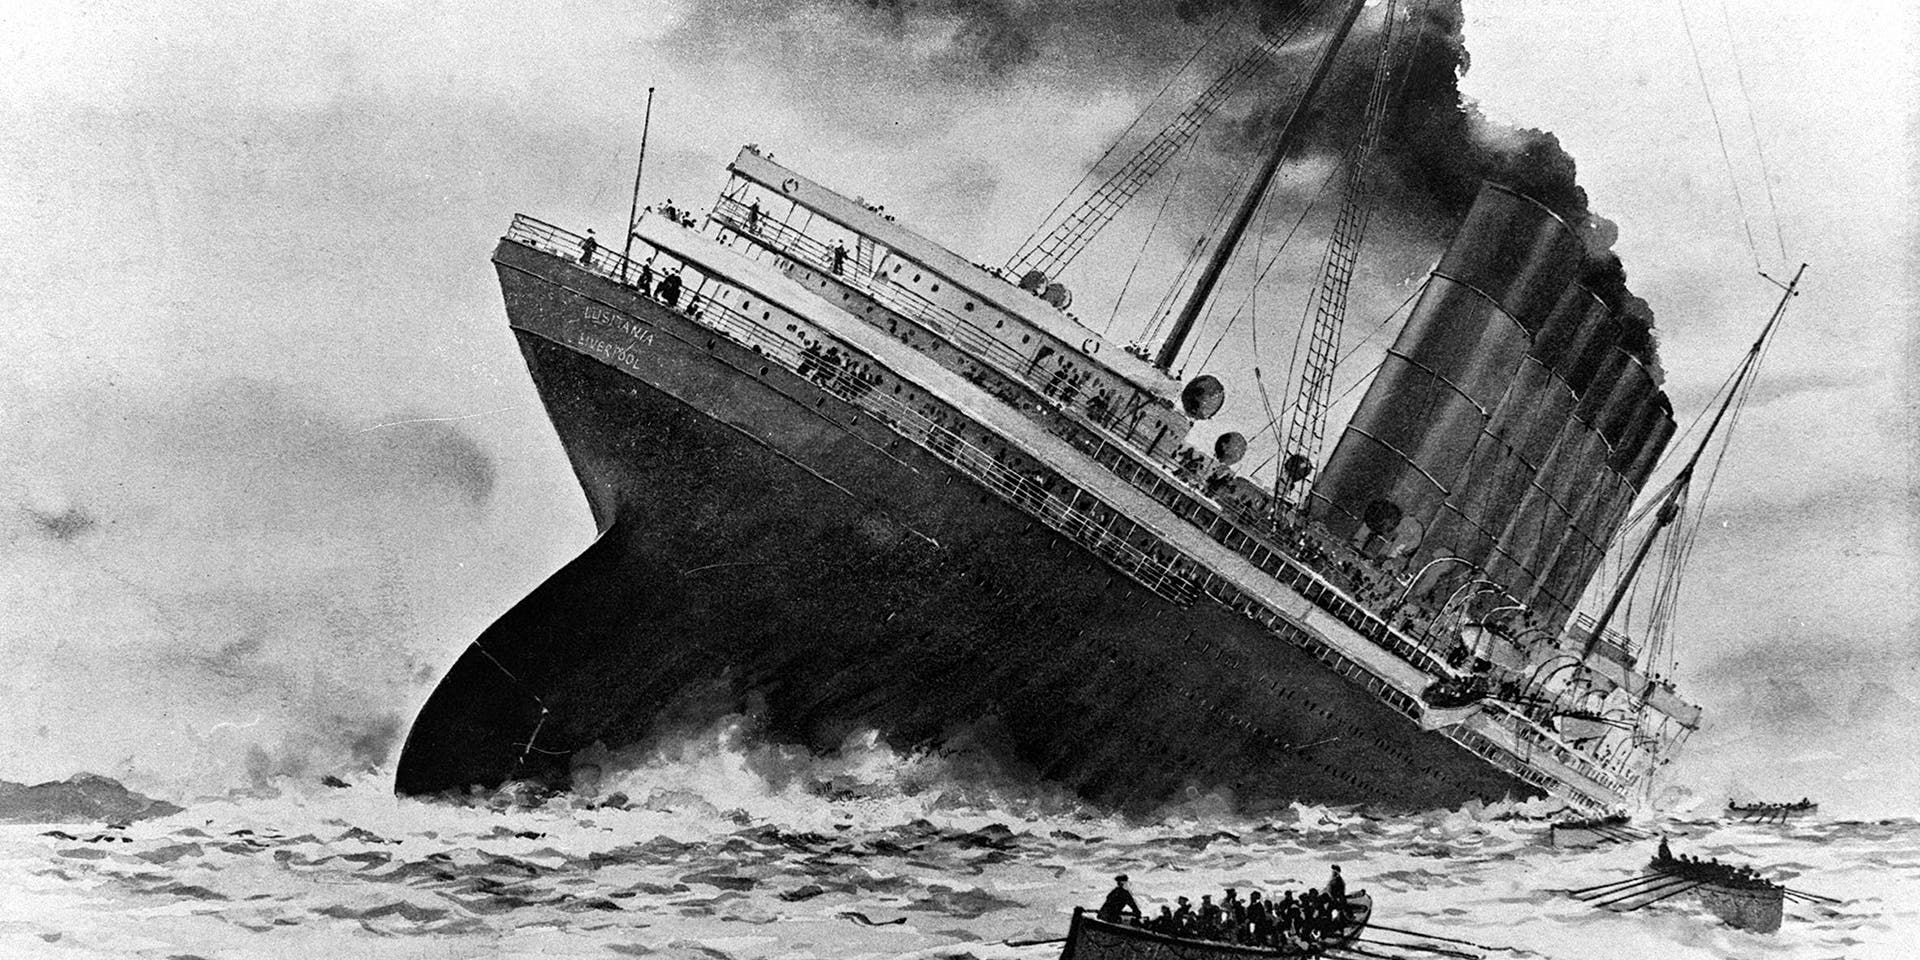 An illustration of the sinking of the British ocean liner RMS Lusitania, torpedoed by German U-boat U-20 off the old head of Kinsale, Ireland.